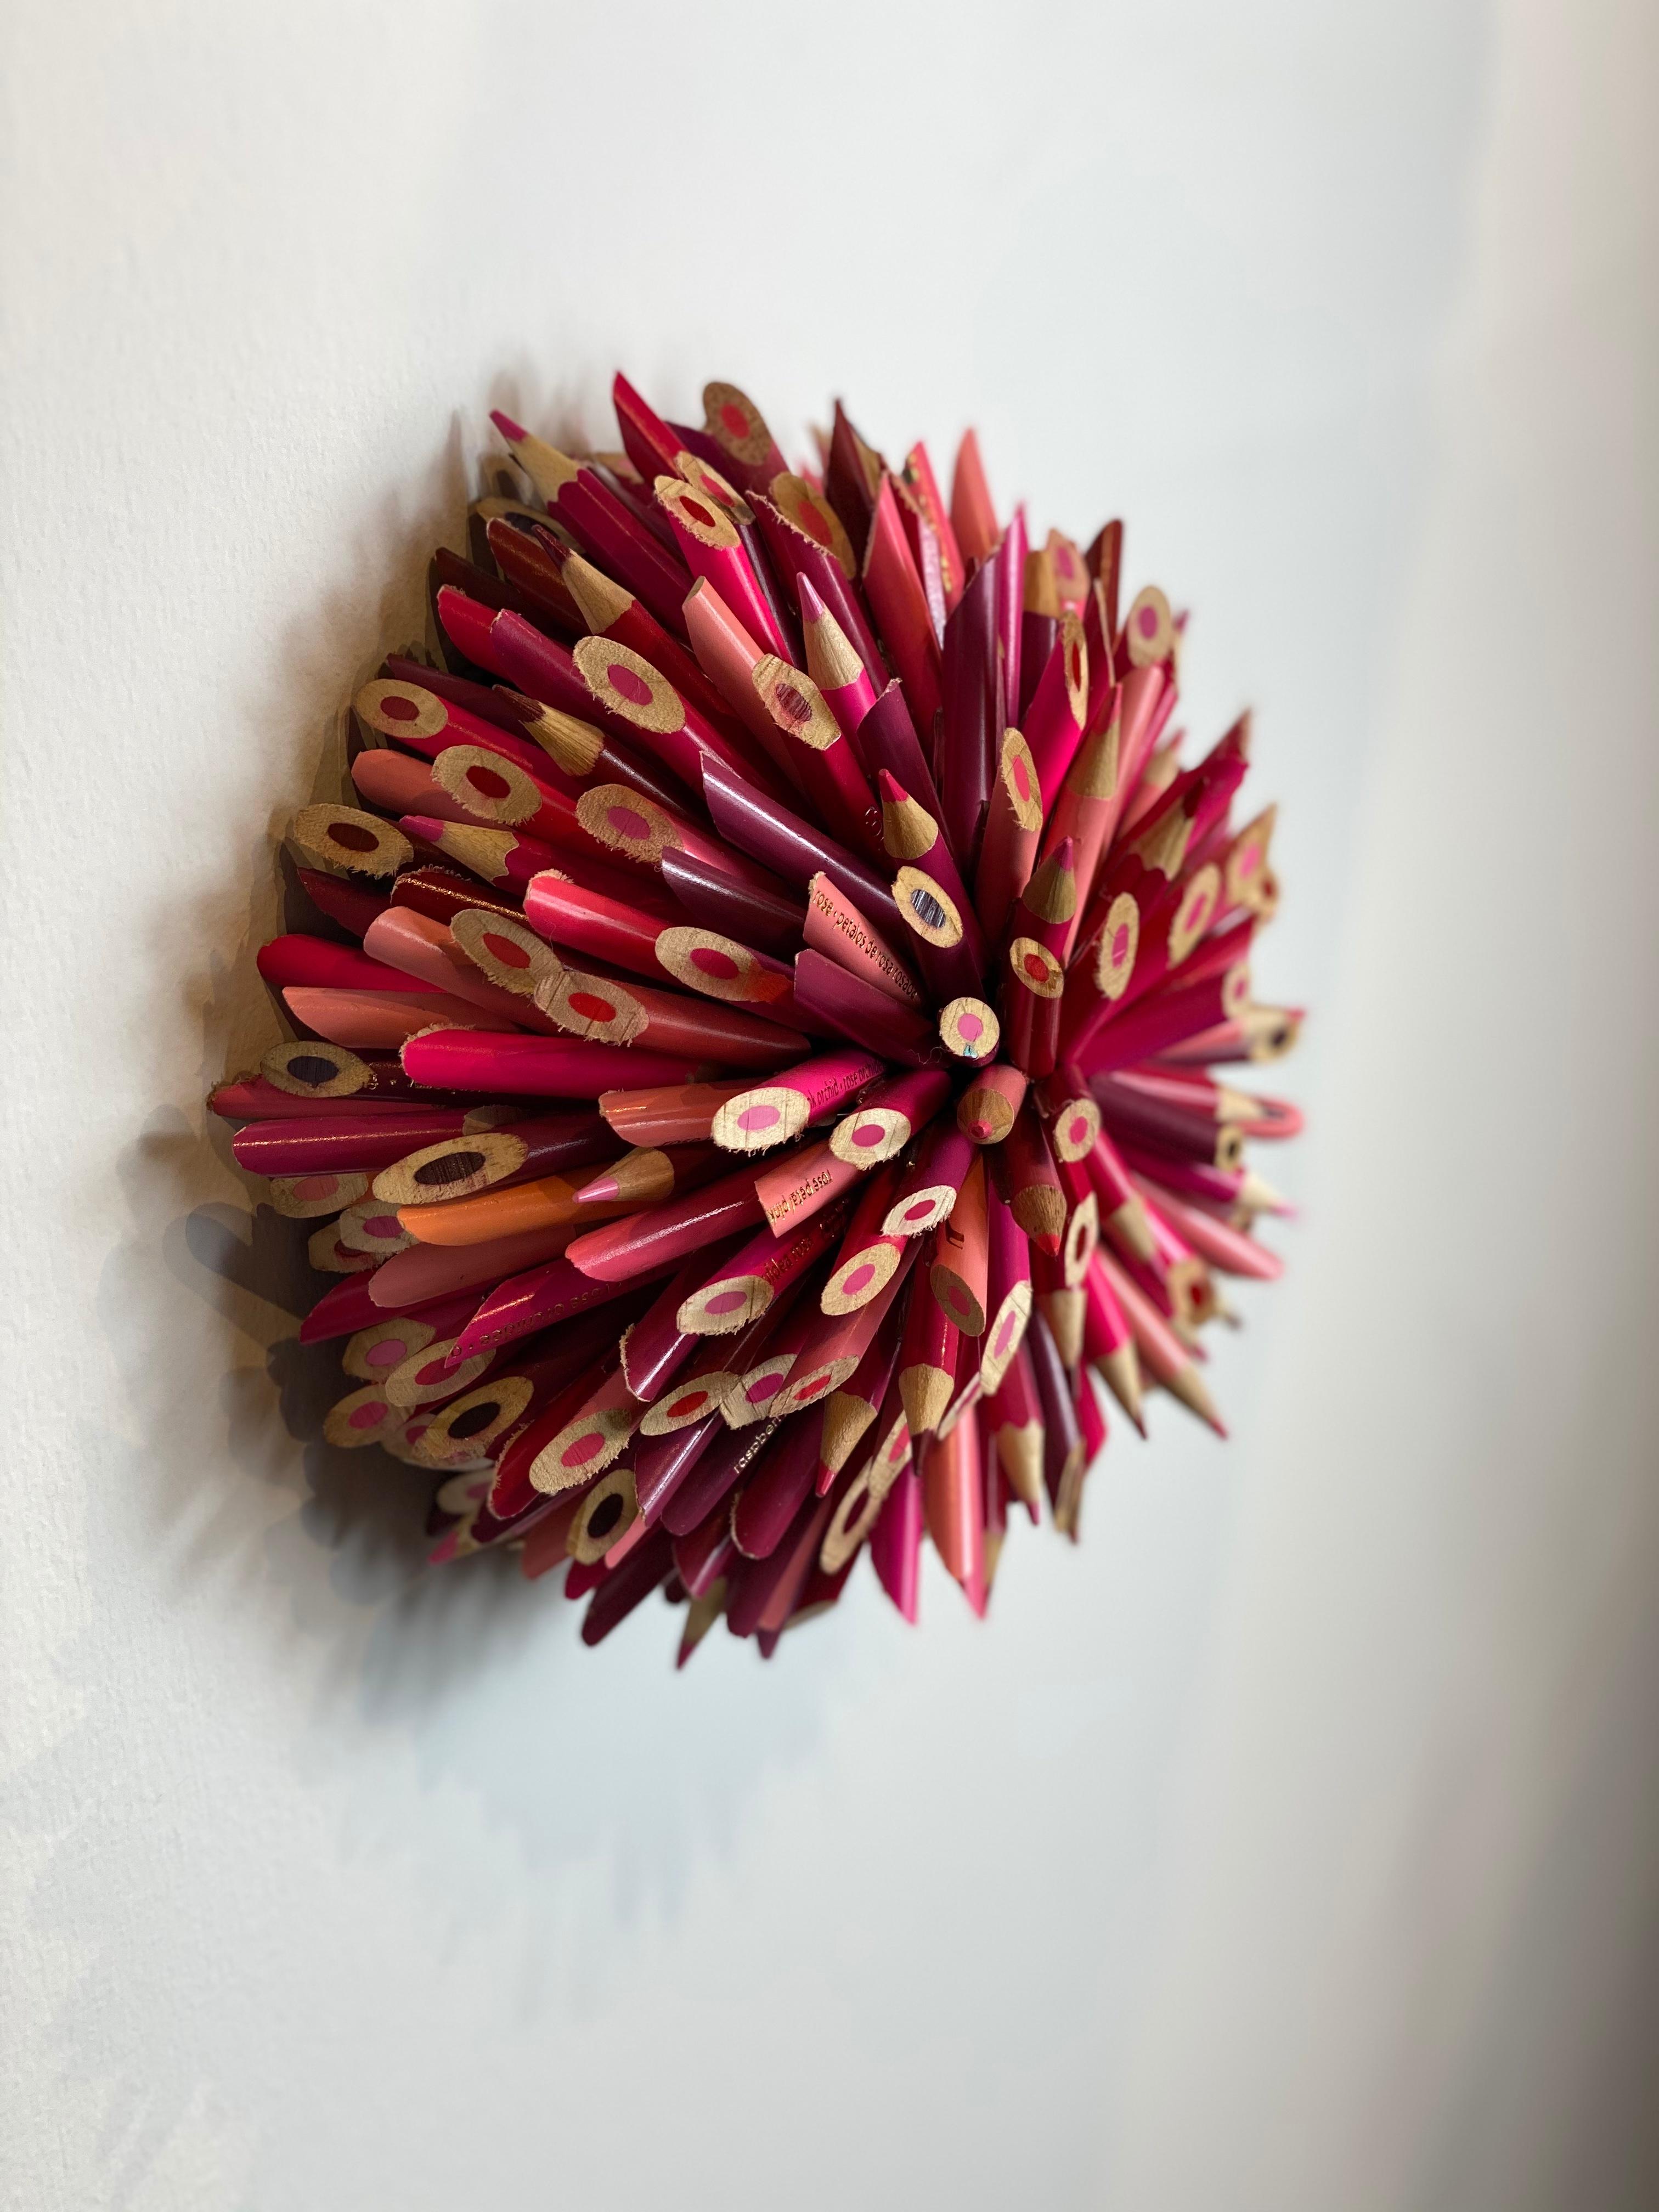 Pink Pencil Flower - Contemporary Mixed Media Art by Federico Uribe